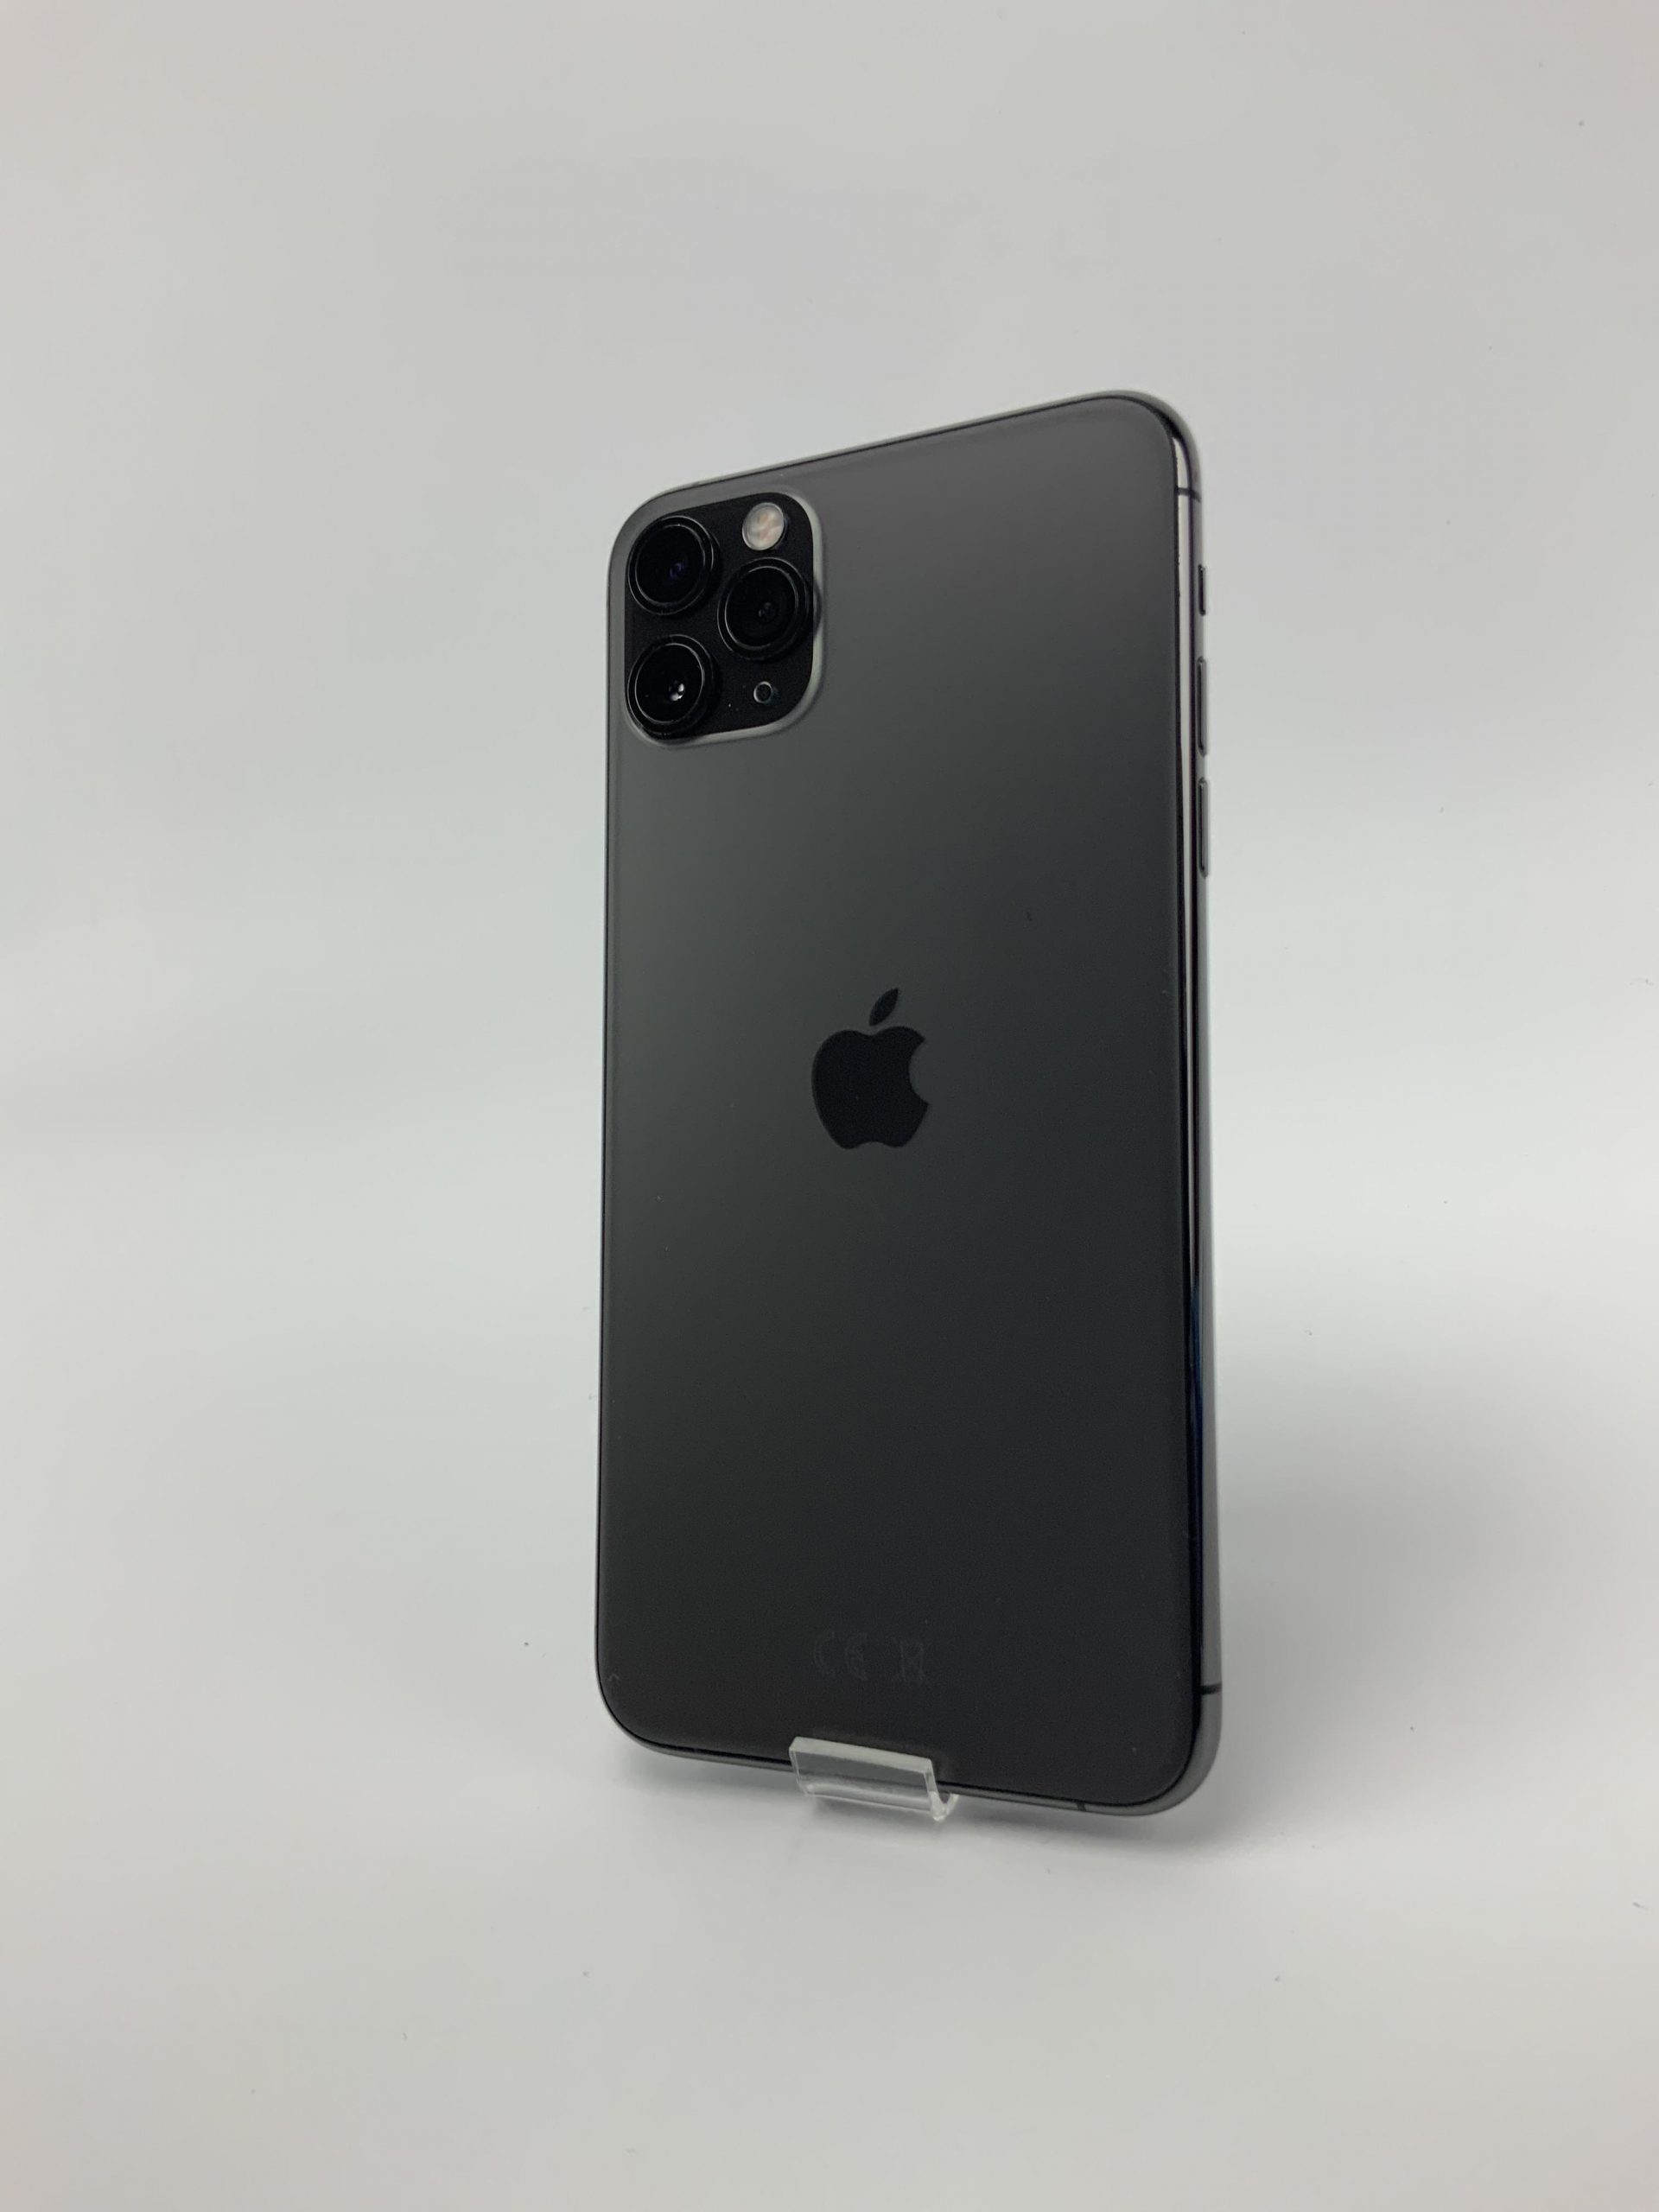 iPhone 11 Pro Max 64GB, 64GB, Space Gray, Afbeelding 2